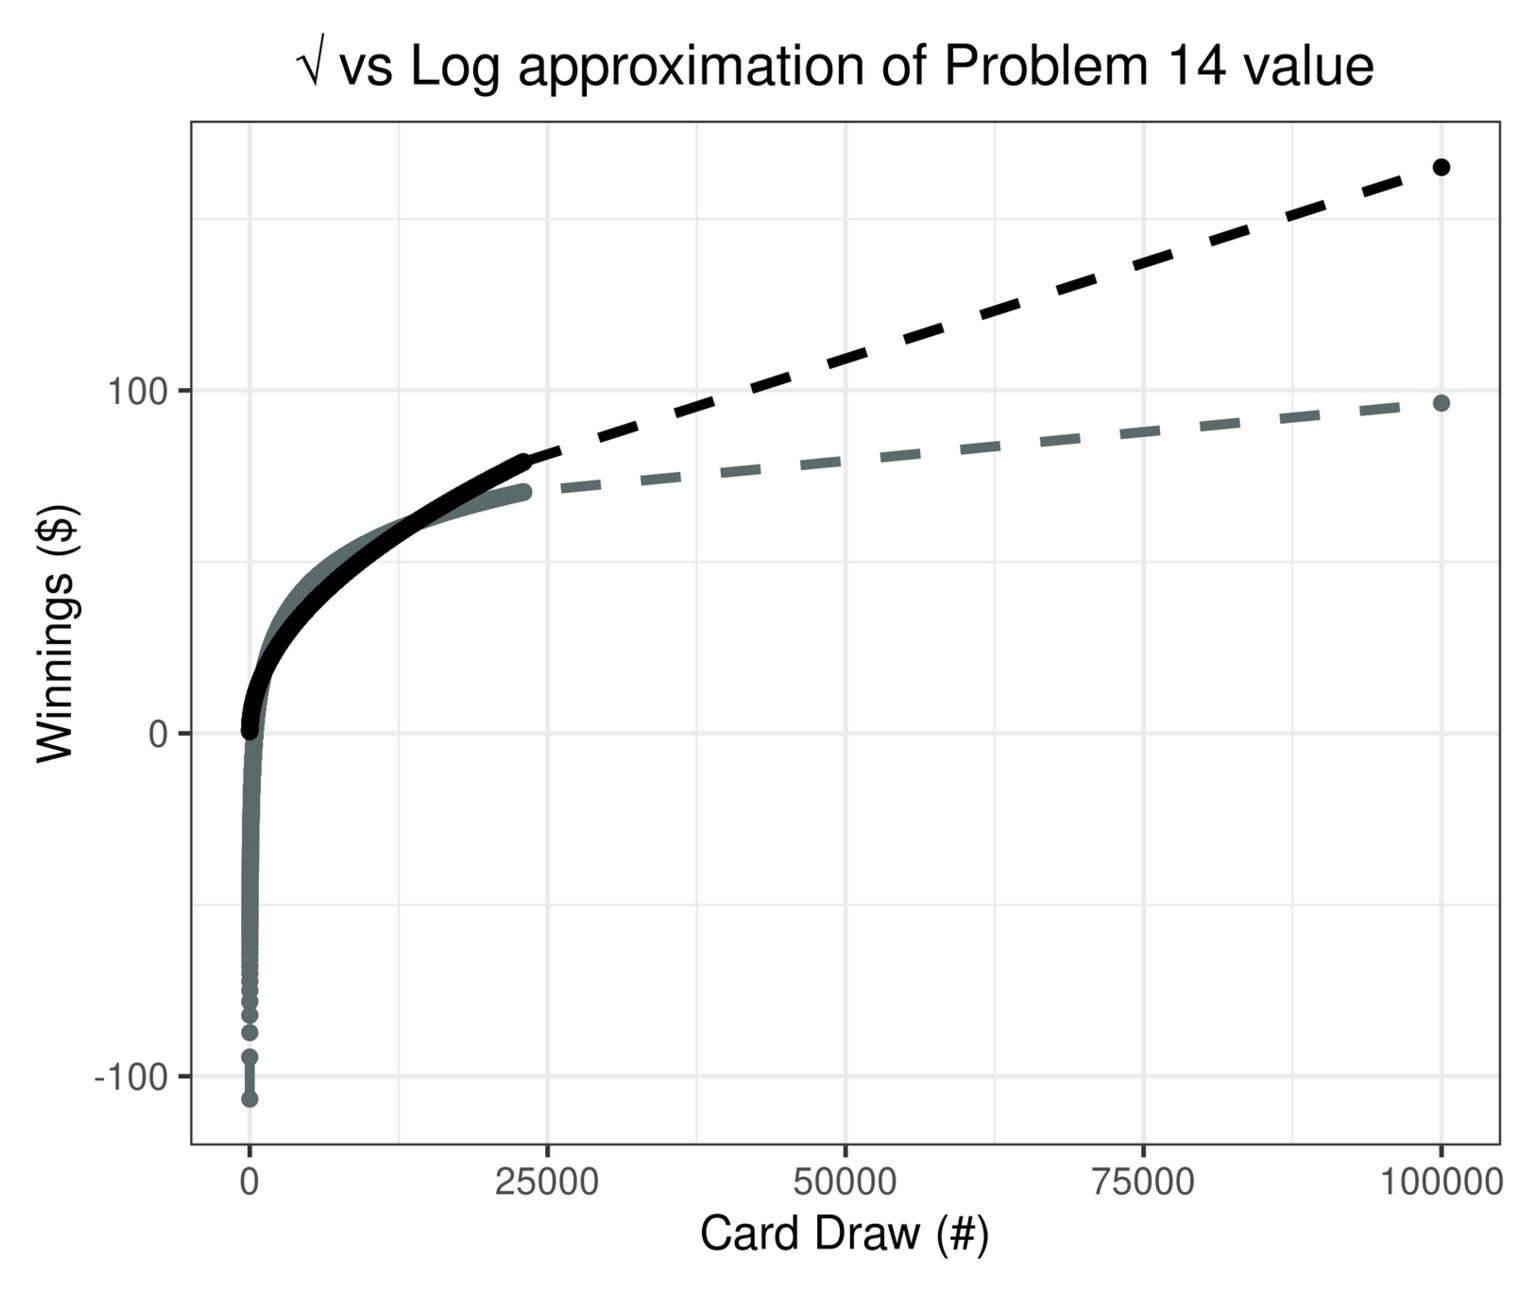 Plotting the square root & logarithmic approximations for the Problem 14 value of card counts = 1–22,294 & 100,000: the square root fits so well that the exact points are hidden, while the log is erroneous almost everywhere.